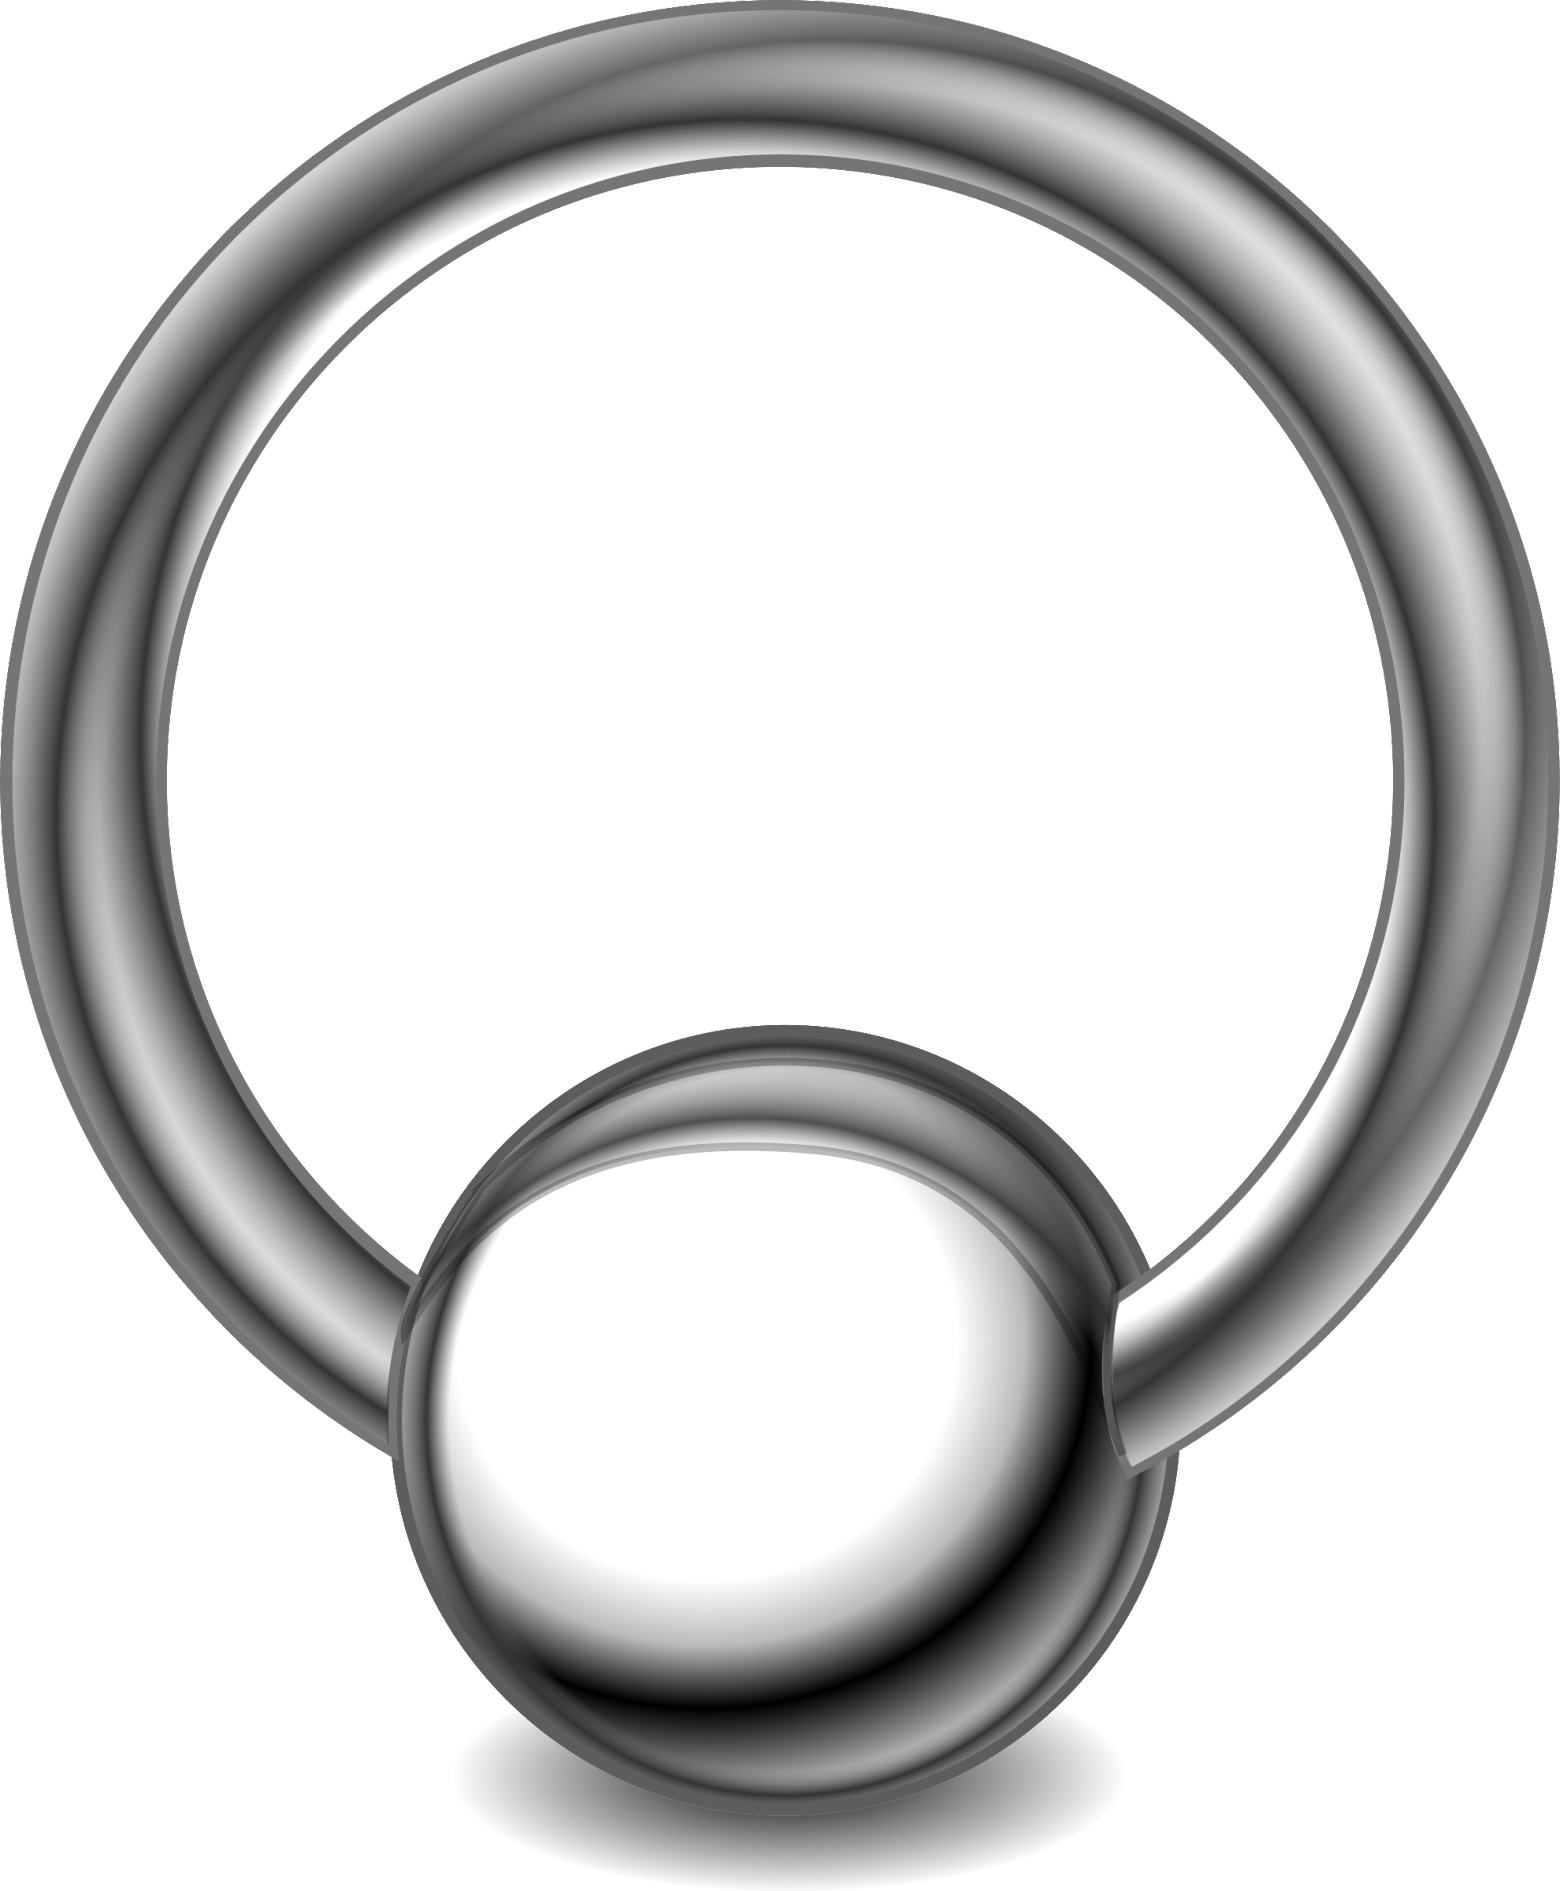 A Silver Ring With A Ball